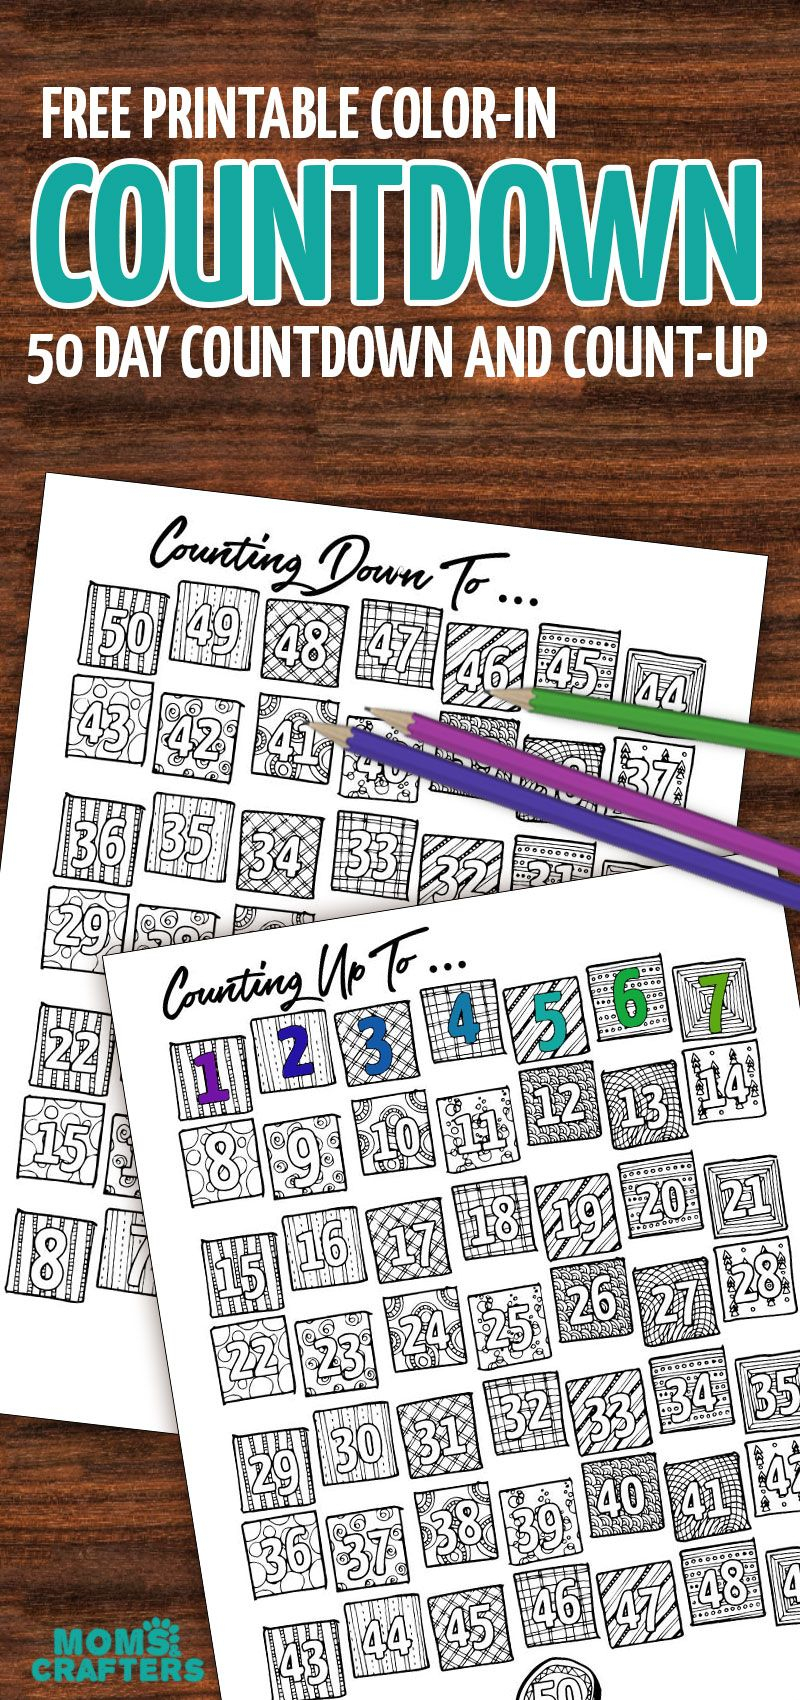 Grab This Fun Color-In Countdown And Progress Tracker | Moms